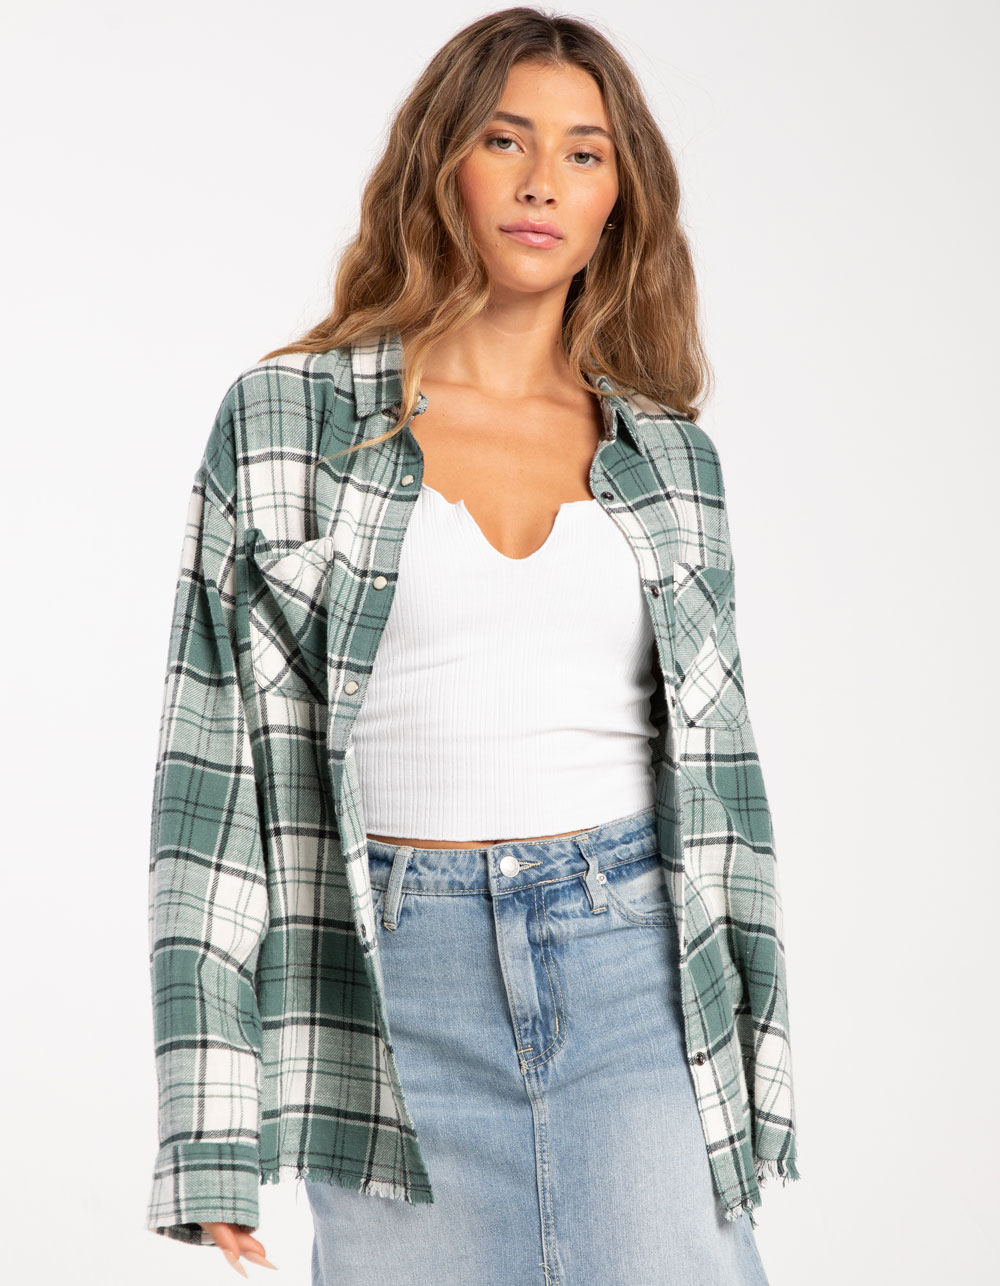 tillys RSQ Womens Oversized Plaid Flannel - CREAM, Tillys